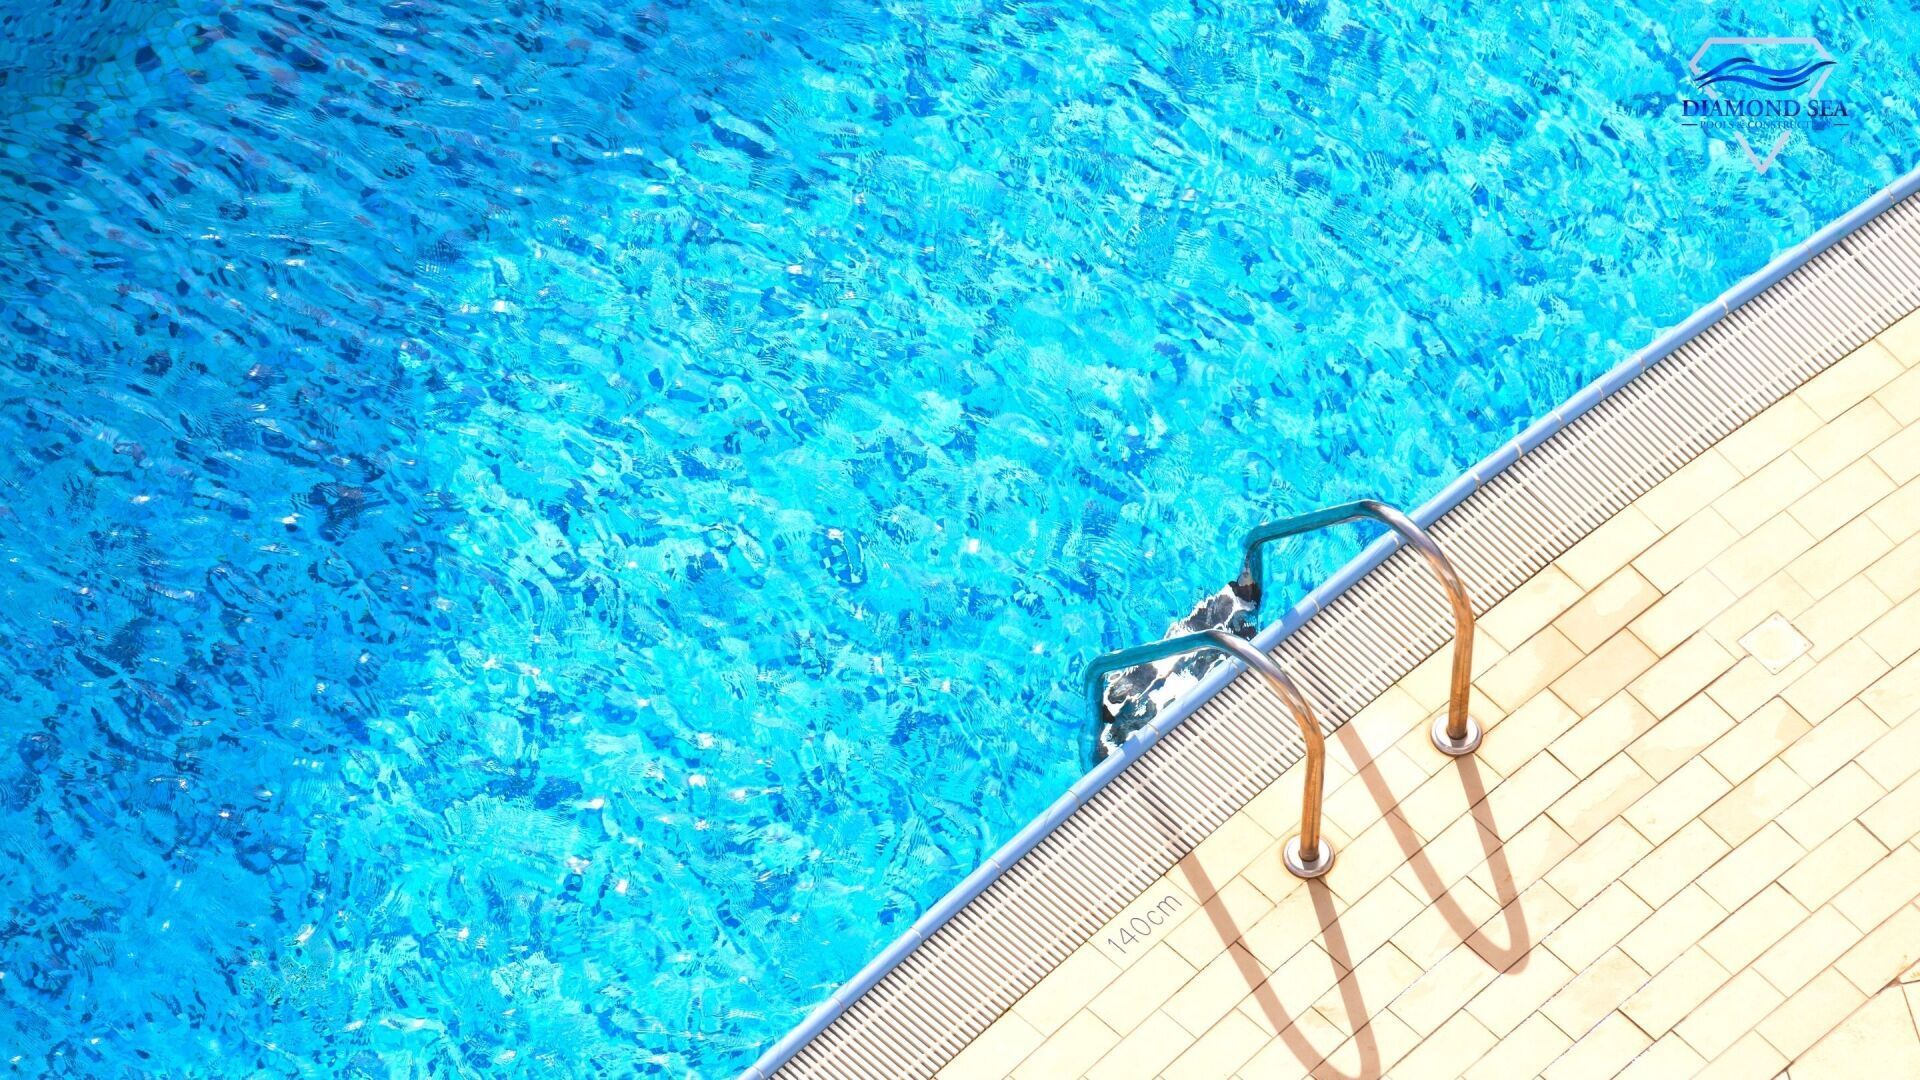 Aerial view of a swimming pool edge and ladder